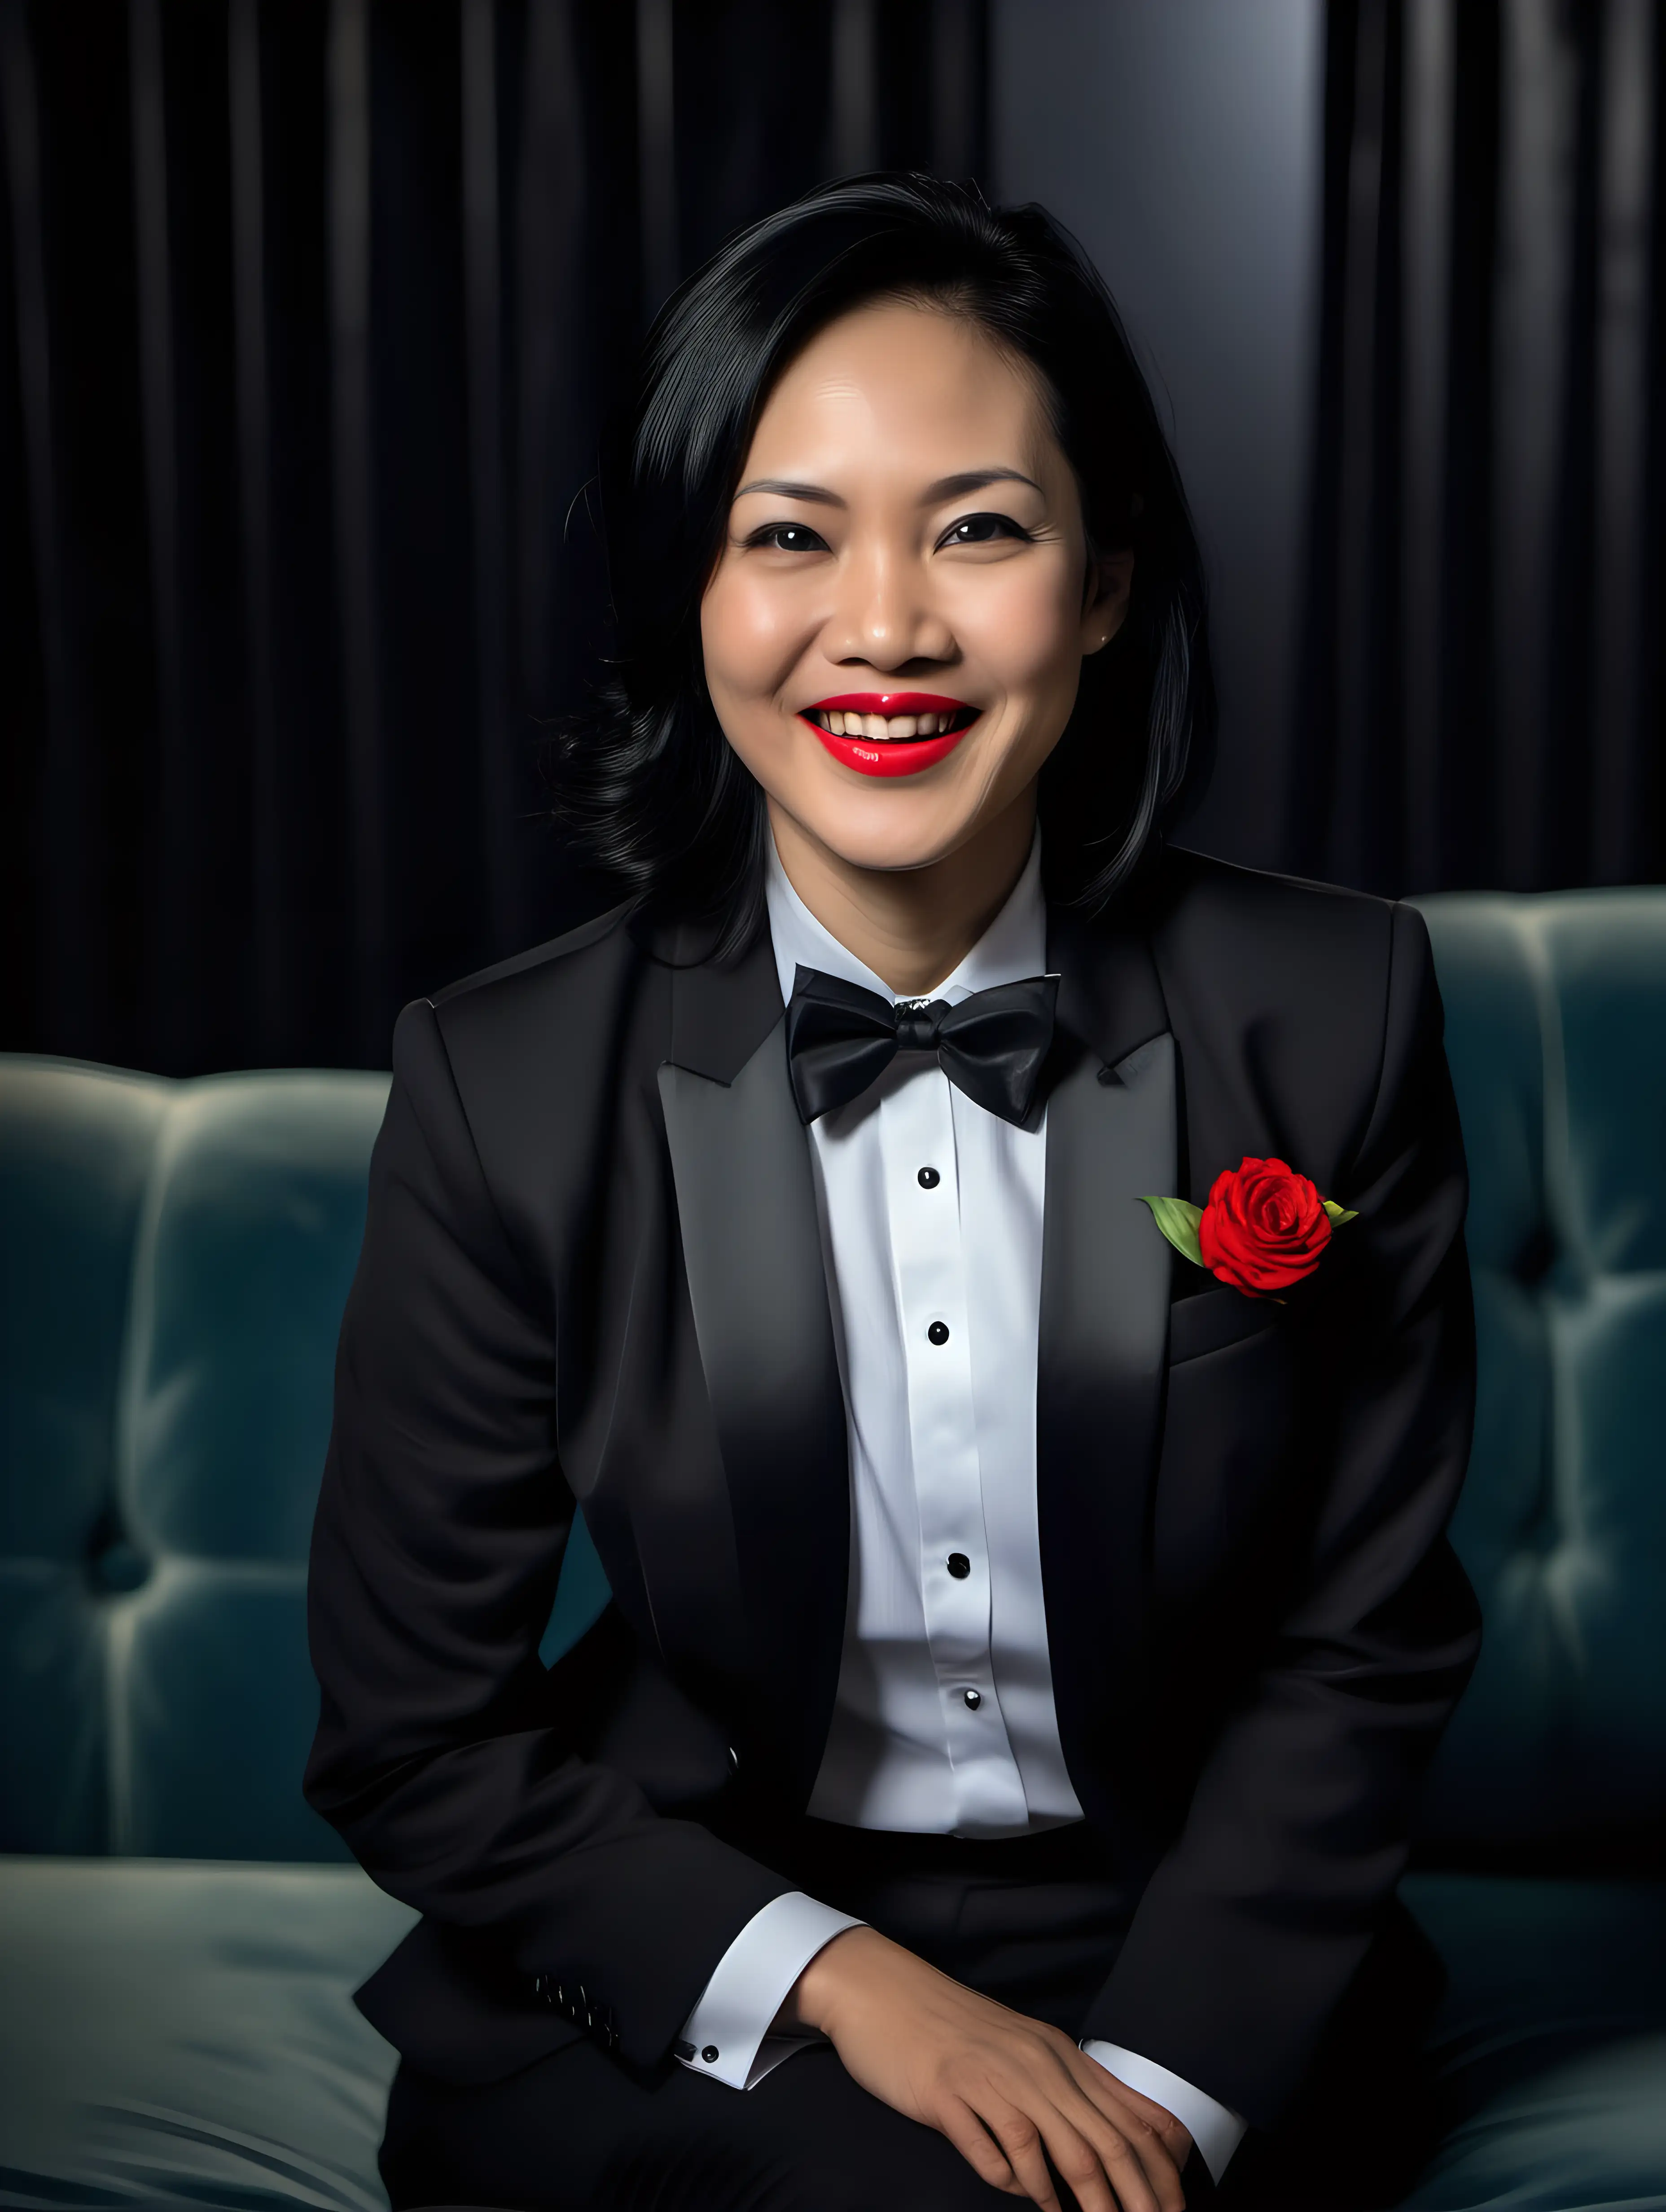 A portrait of a pretty 40 year old Vietnamese woman with shoulder length black hair and red lipstick is sitting on a sofa in a dark room. She is facing forward. She is smiling and joyful and ecstatic. She is wearing a tuxedo. (Her jacket is open and not buttoned.) (Her pants are black.) Her shirt is white with a black bow tie. Her cufflinks are large and black. Her jacket is open and has a corsage.